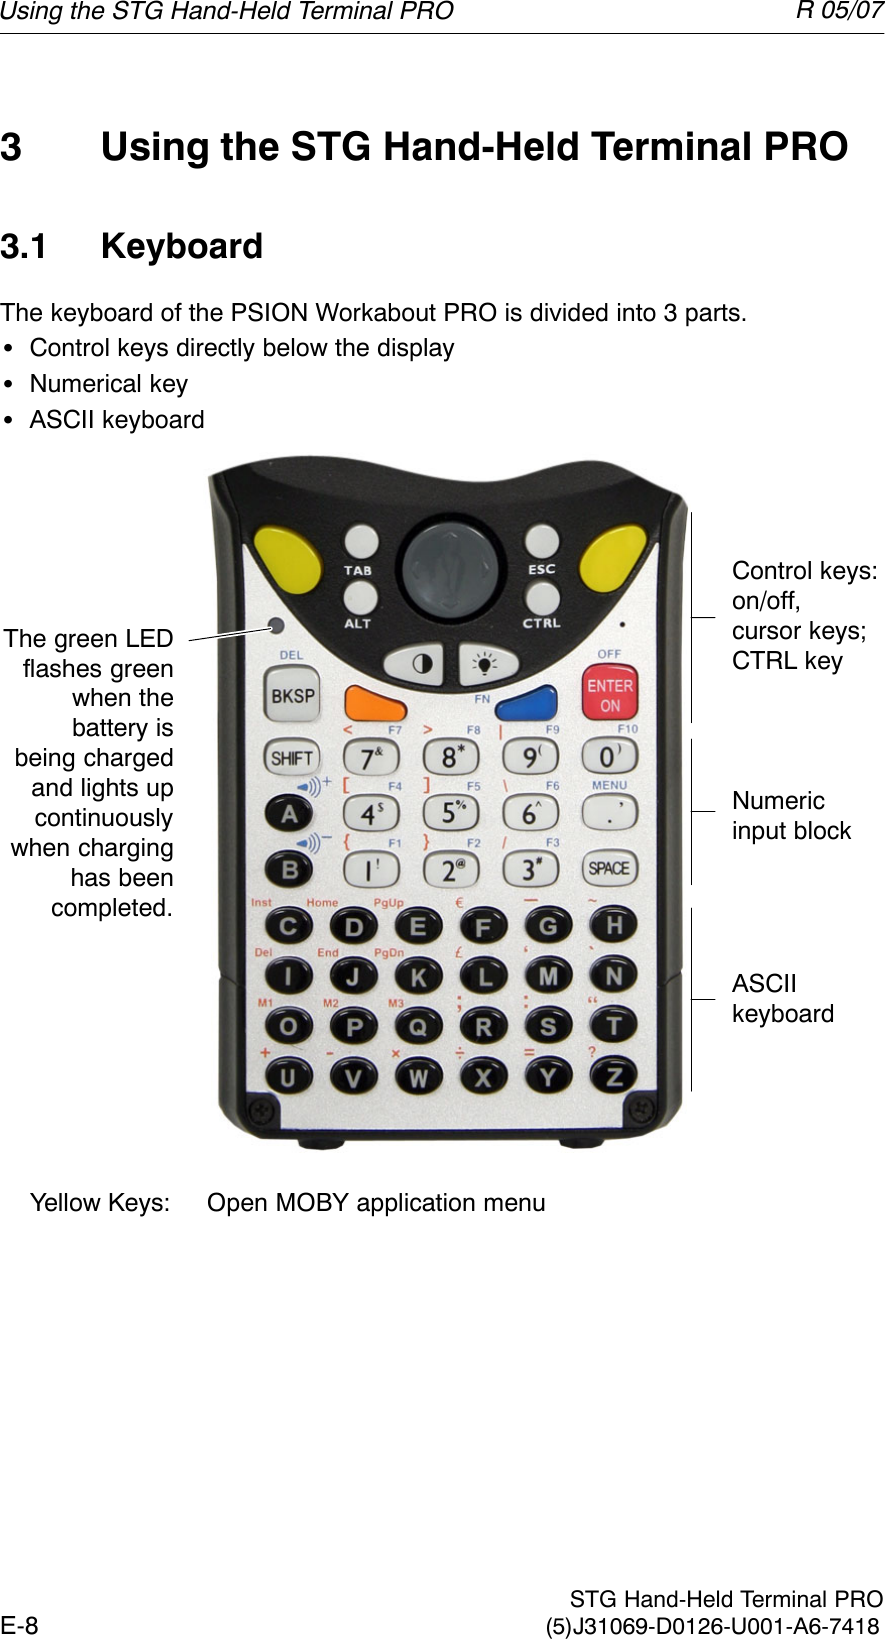 R 05/07E-8  STG Hand-Held Terminal PRO(5)J31069-D0126-U001-A6-74183 Using the STG Hand-Held Terminal PRO3.1 KeyboardThe keyboard of the PSION Workabout PRO is divided into 3 parts.SControl keys directly below the displaySNumerical keySASCII keyboardASCIIkeyboardControl keys: on/off, cursor keys; CTRL keyNumeric input blockThe green LEDflashes greenwhen thebattery isbeing chargedand lights upcontinuouslywhen charginghas beencompleted. Yellow Keys: Open MOBY application menuUsing the STG Hand-Held Terminal PRO